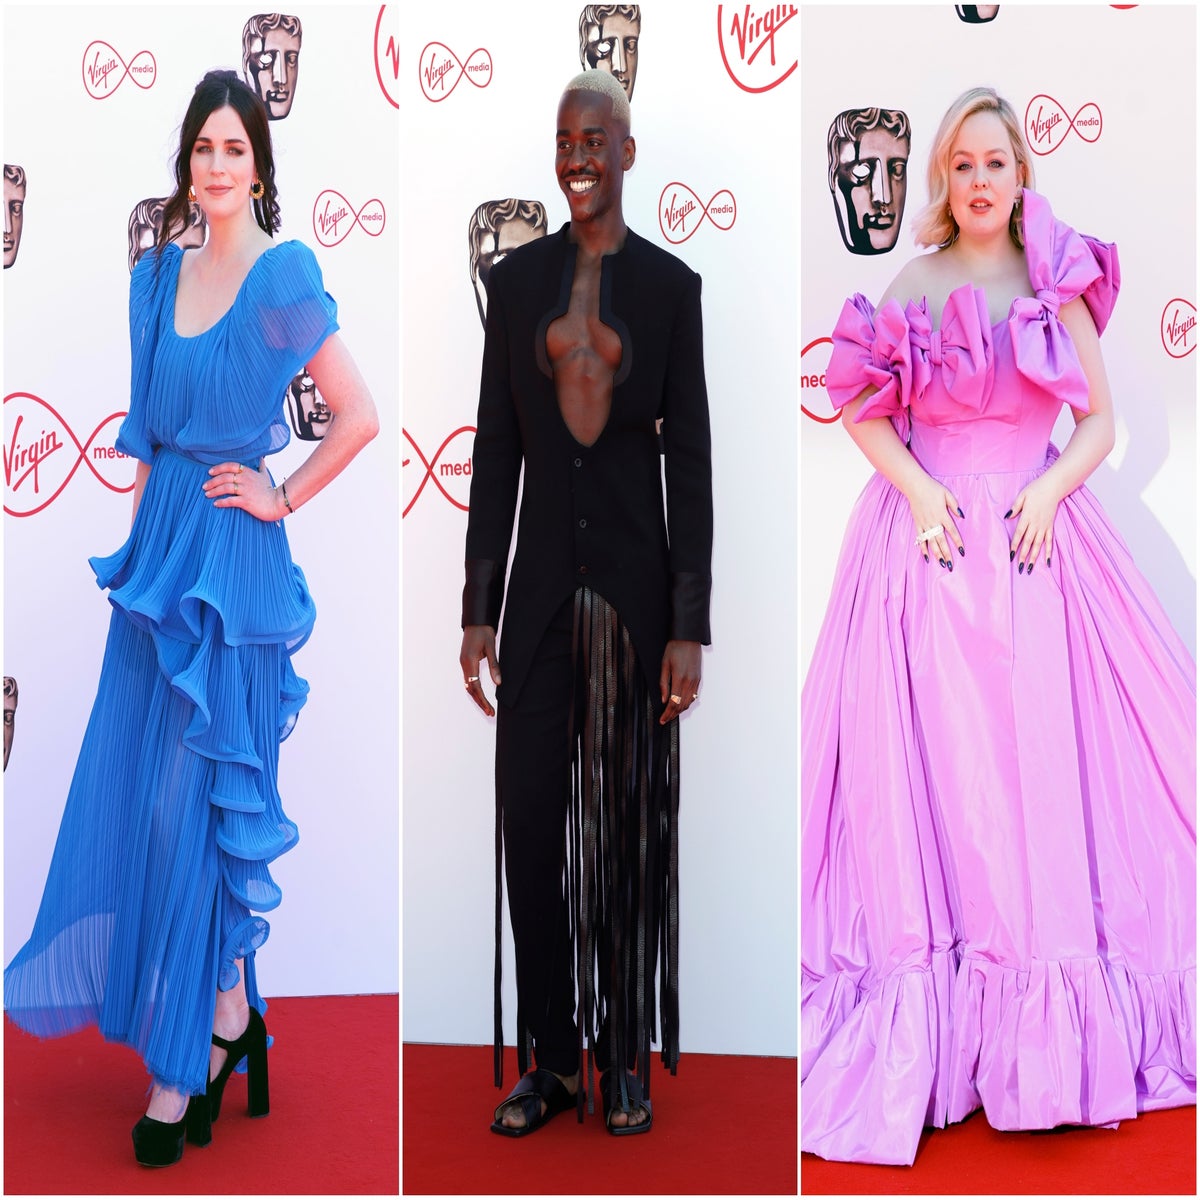 The Best Dressed Stars at the 2022 BAFTA Awards - RUNWAY MAGAZINE ® Official